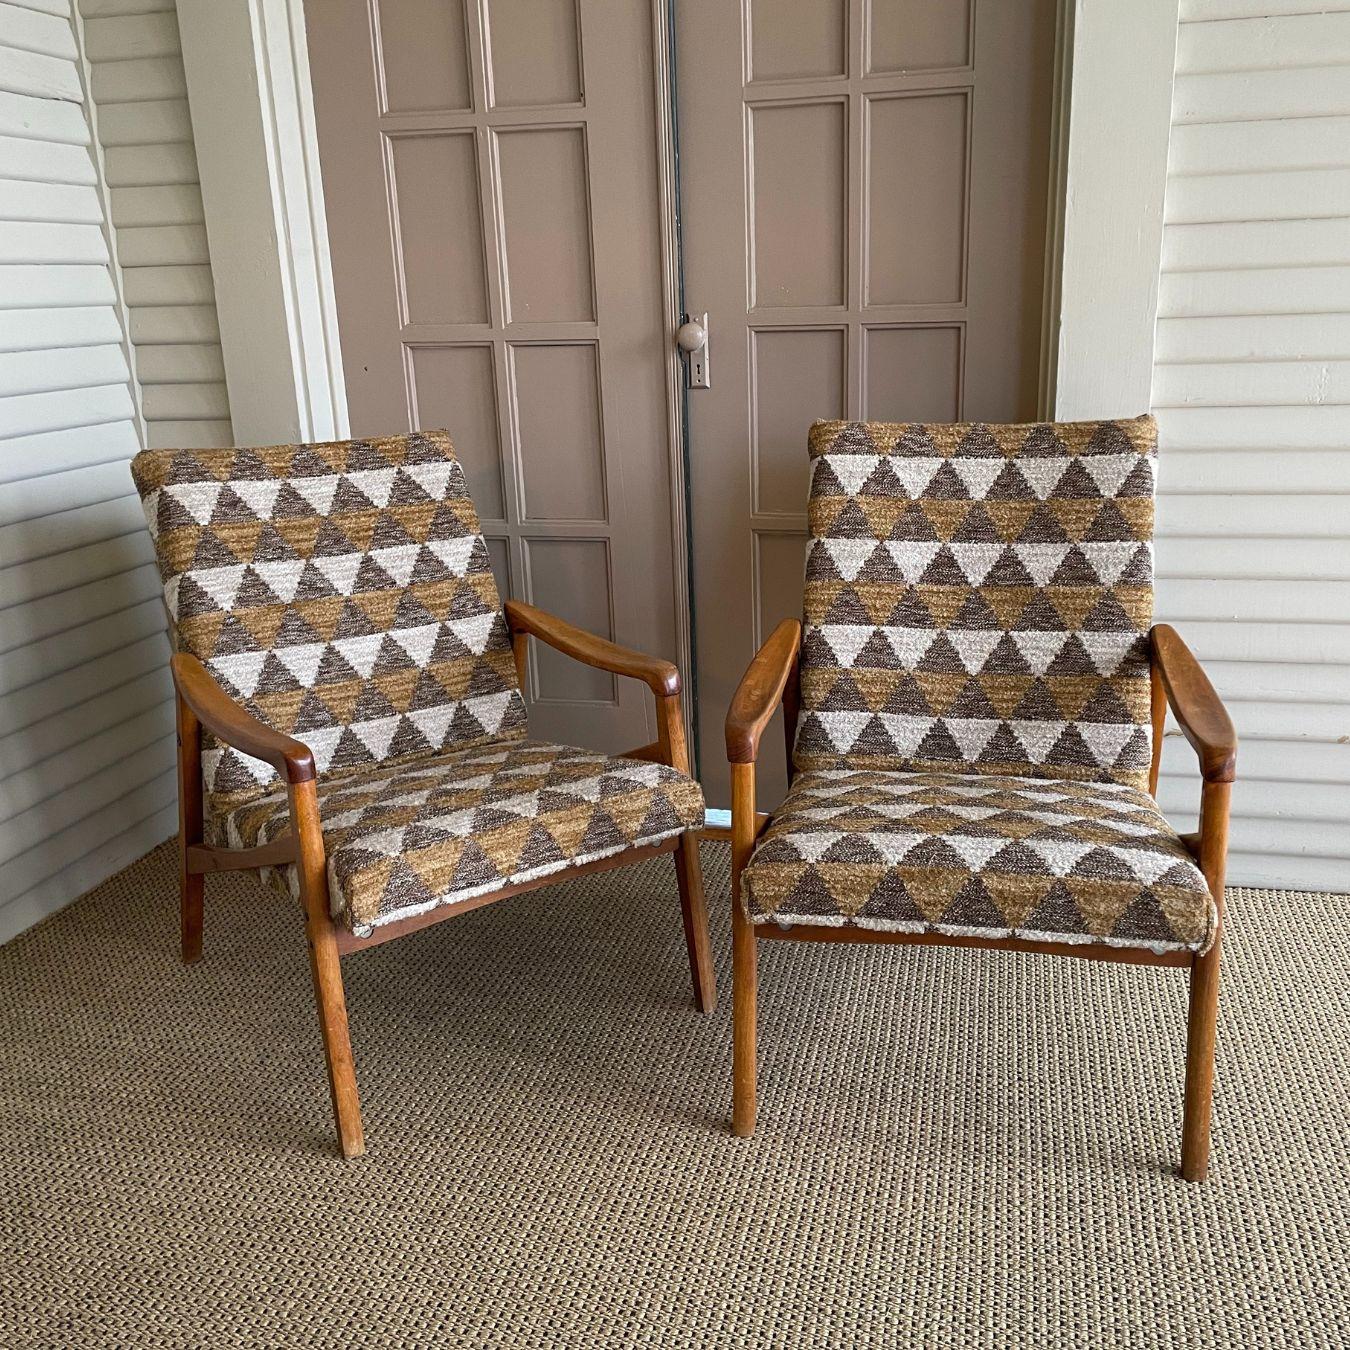 Pair Newly Upholstered Midcentury Teak Armchairs Olive & Beige Geometric Pattern For Sale 3